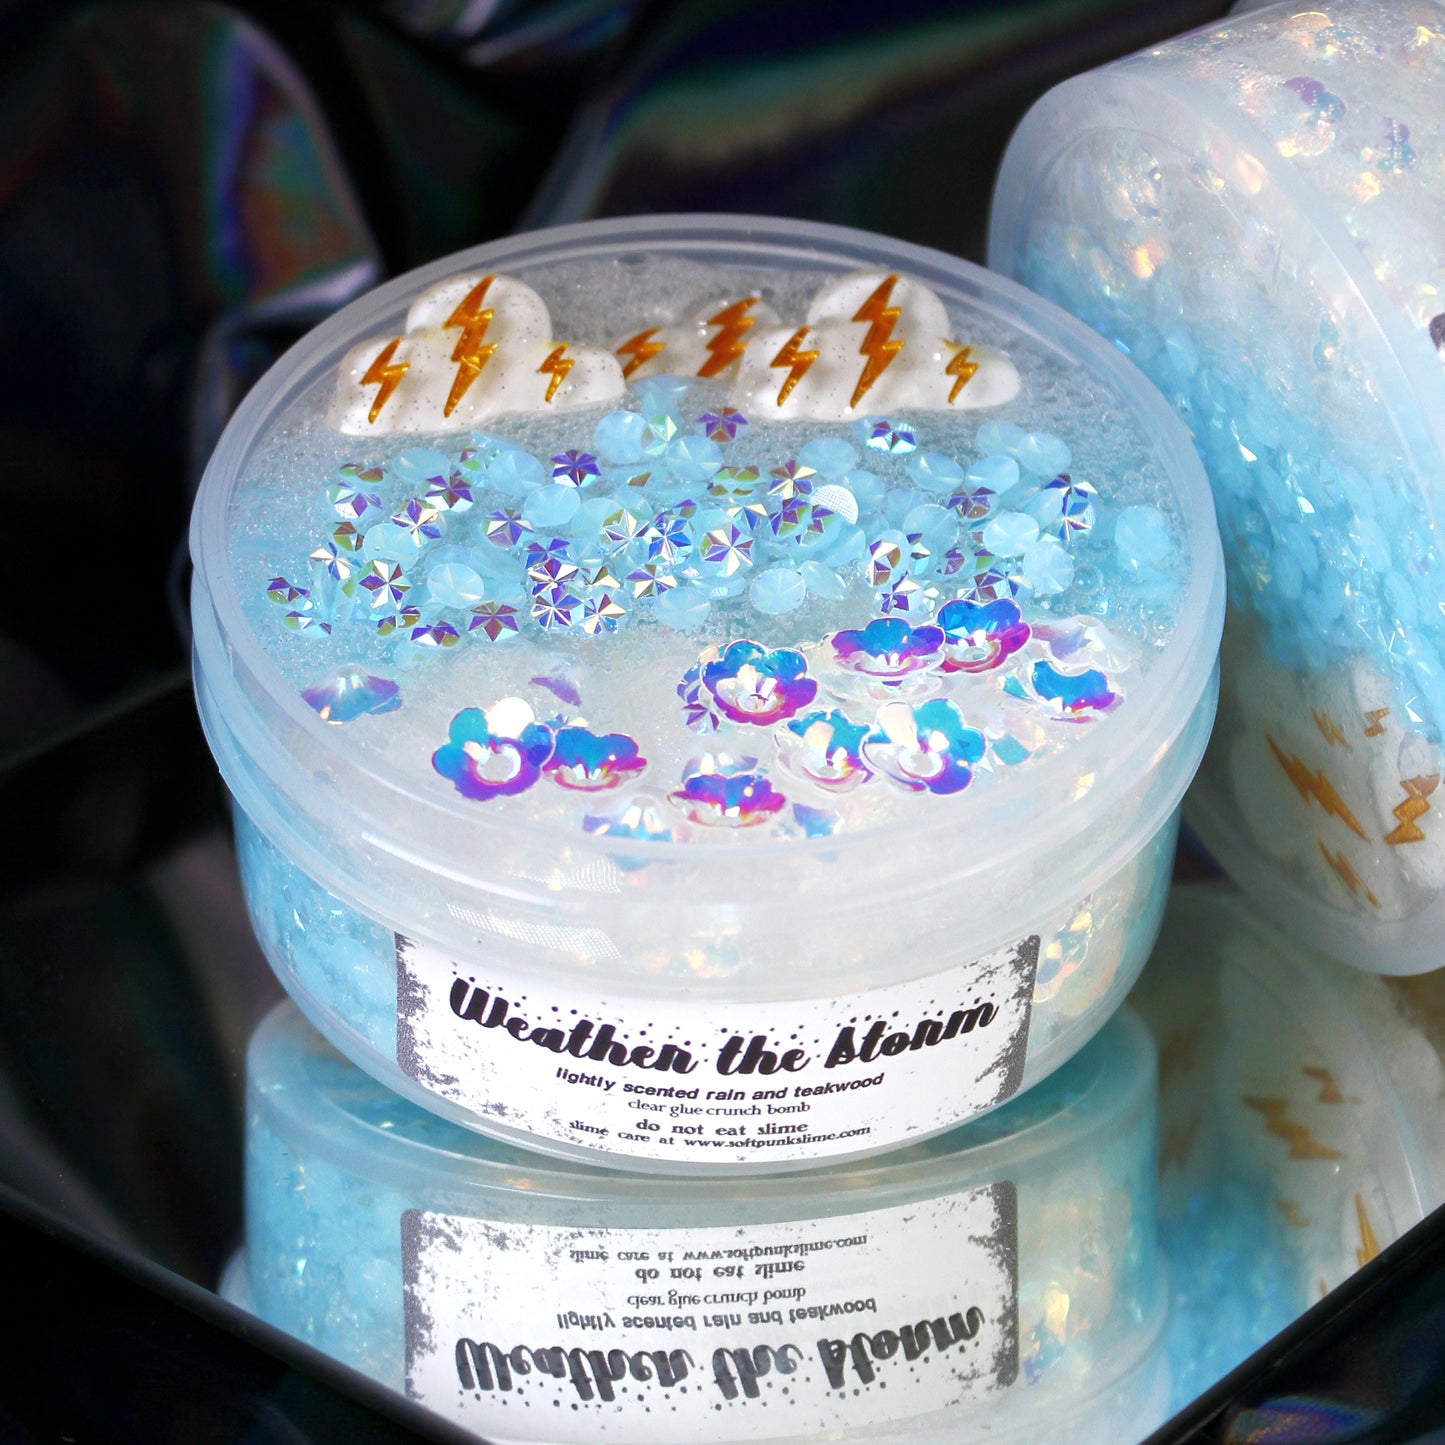 WEATHER THE STORM (4 oz.)